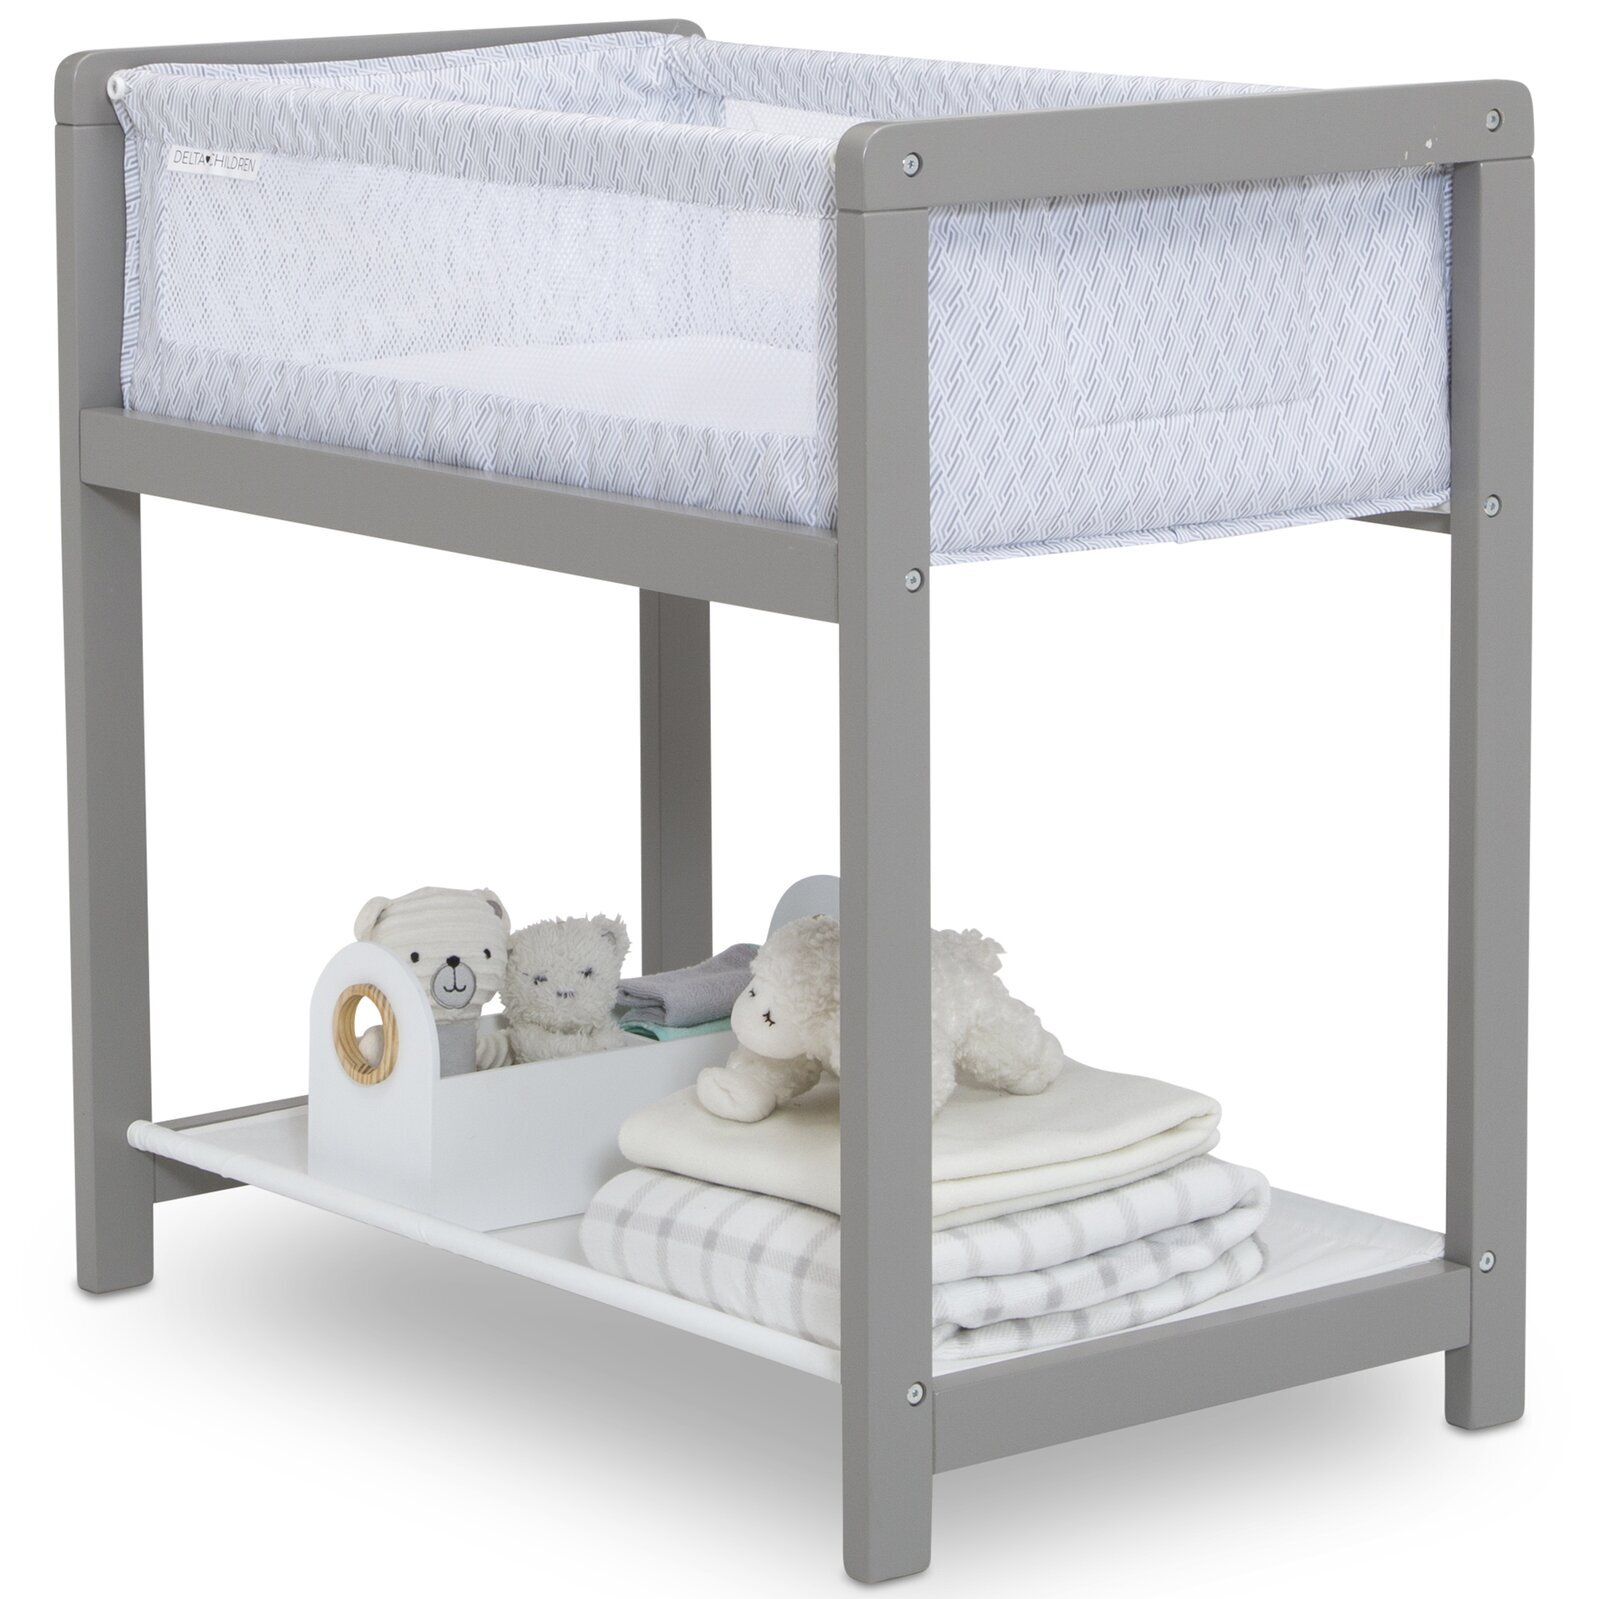 Wooden bassinet with mesh